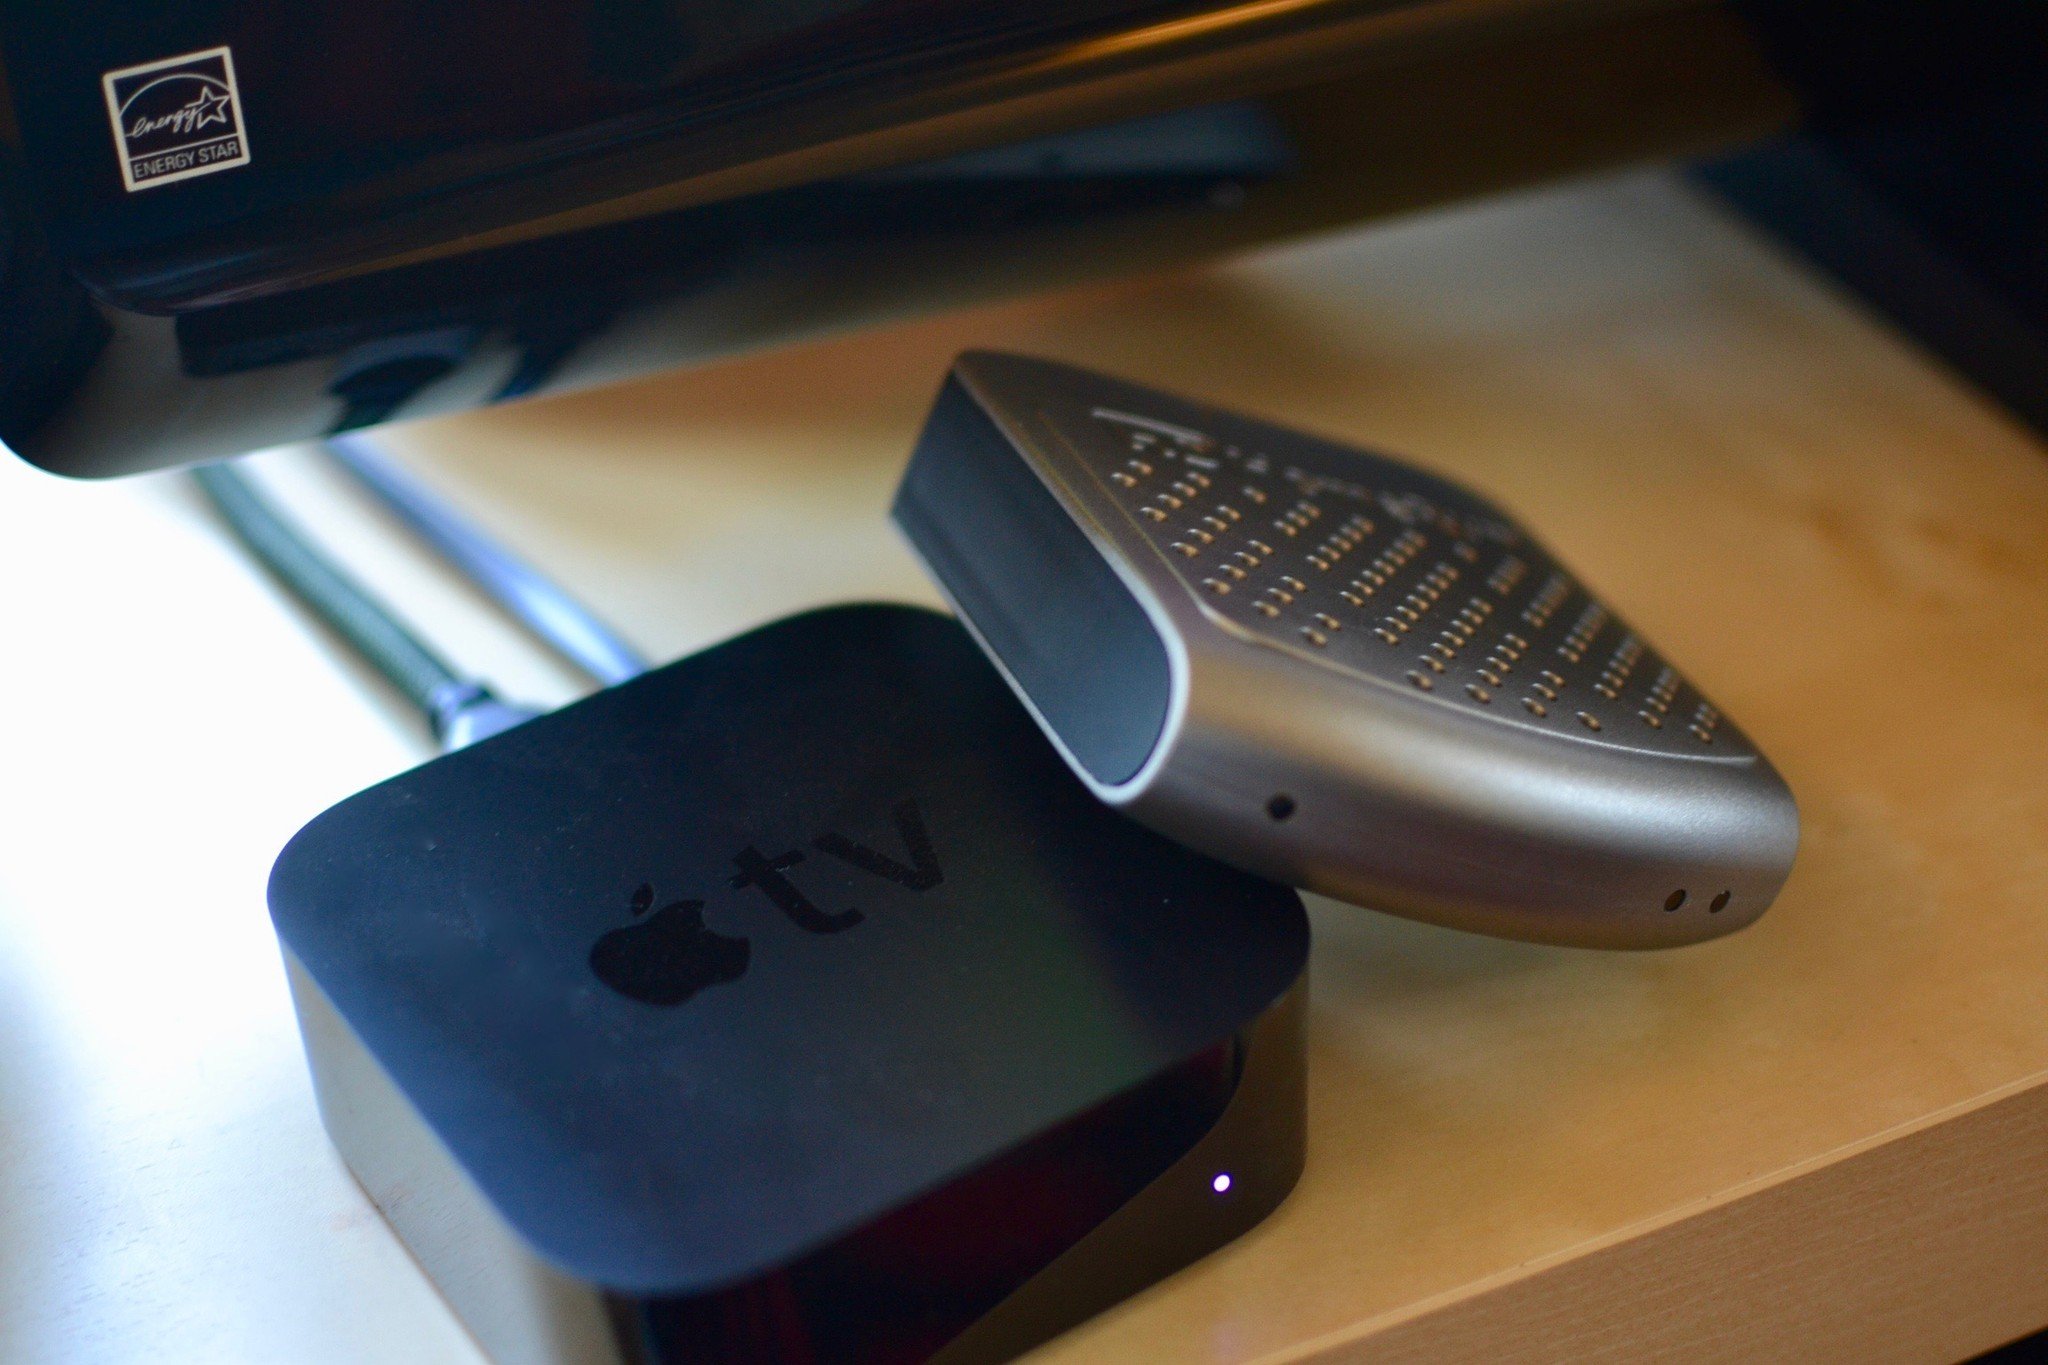 How to watch live broadcast TV on your Apple TV without cable | iMore1600 x 1066